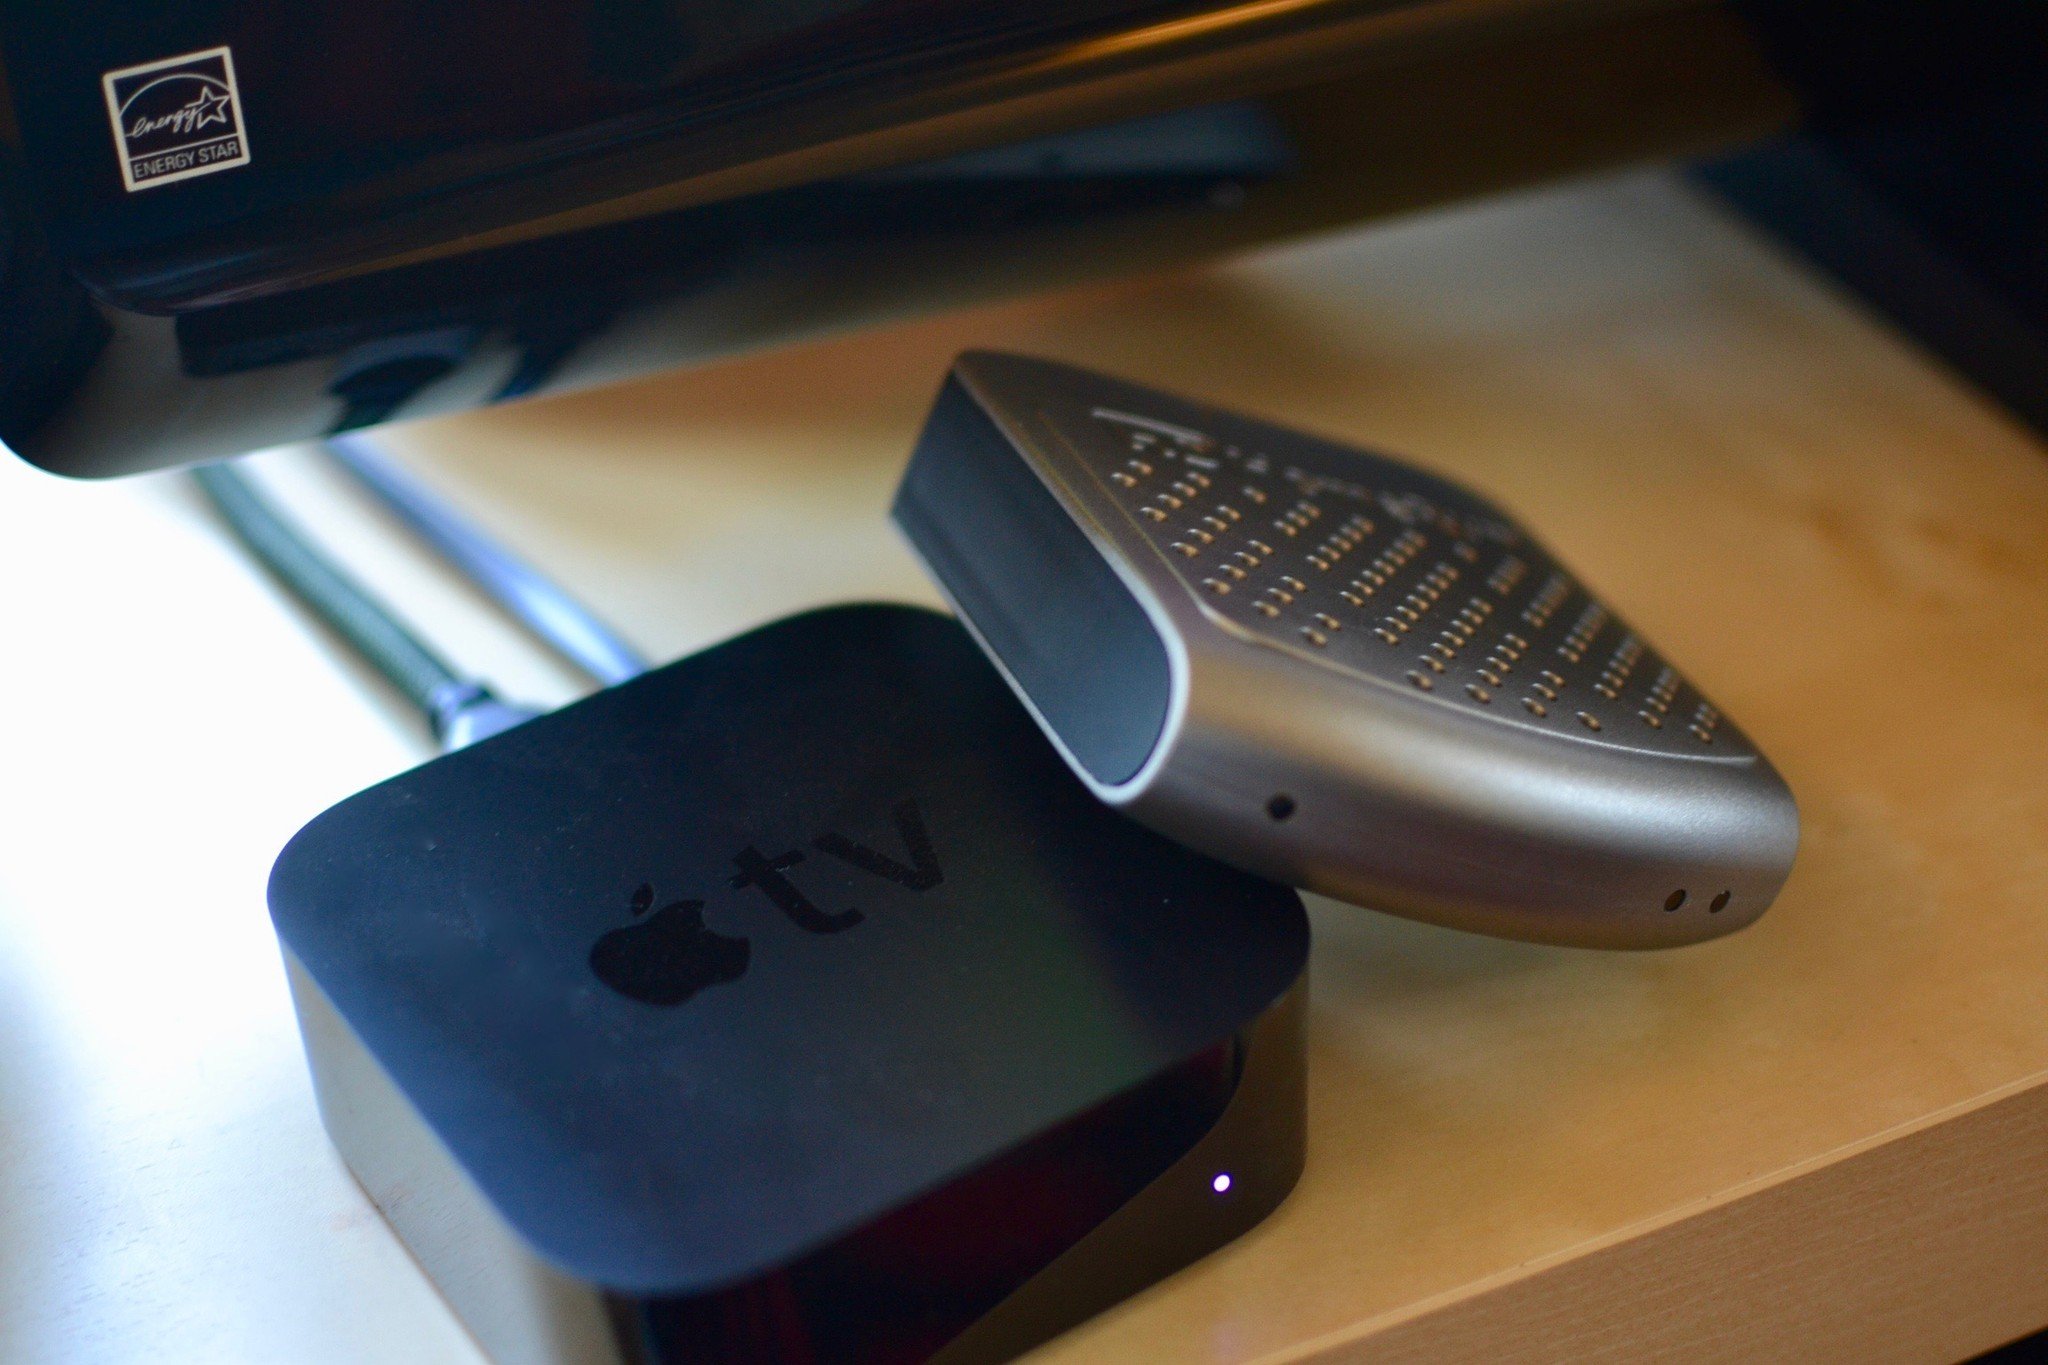 How to watch live broadcast TV on your Apple TV without cable | iMore1600 x 1066